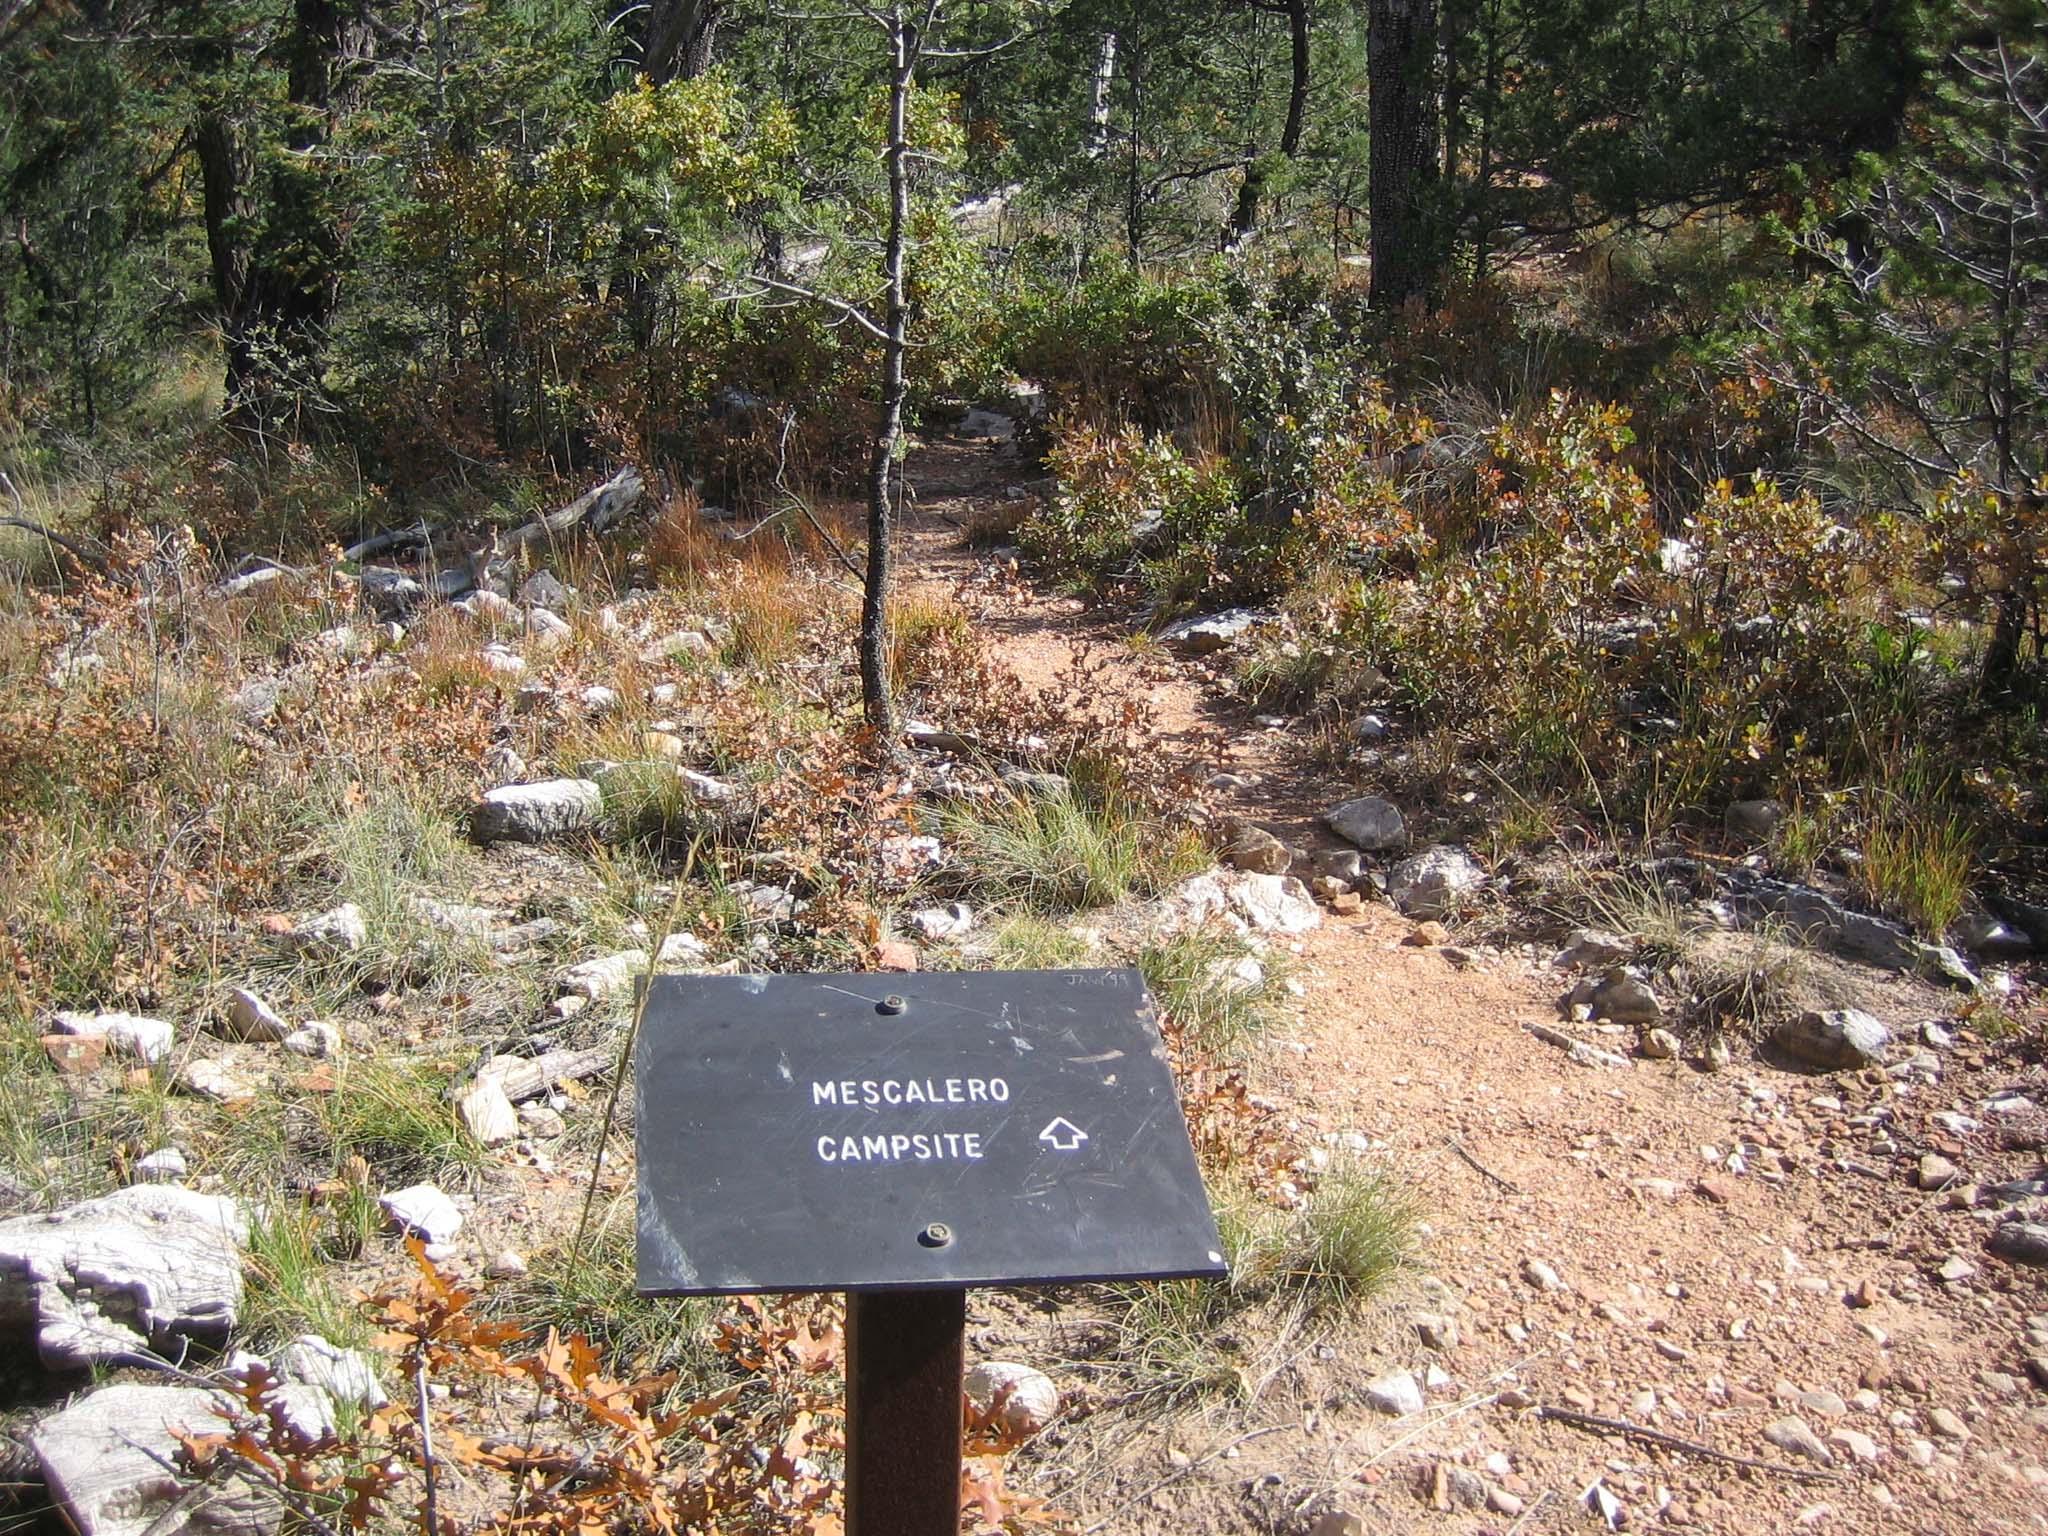 A metal sign directs hikers off the trail to the Mescalero campsites